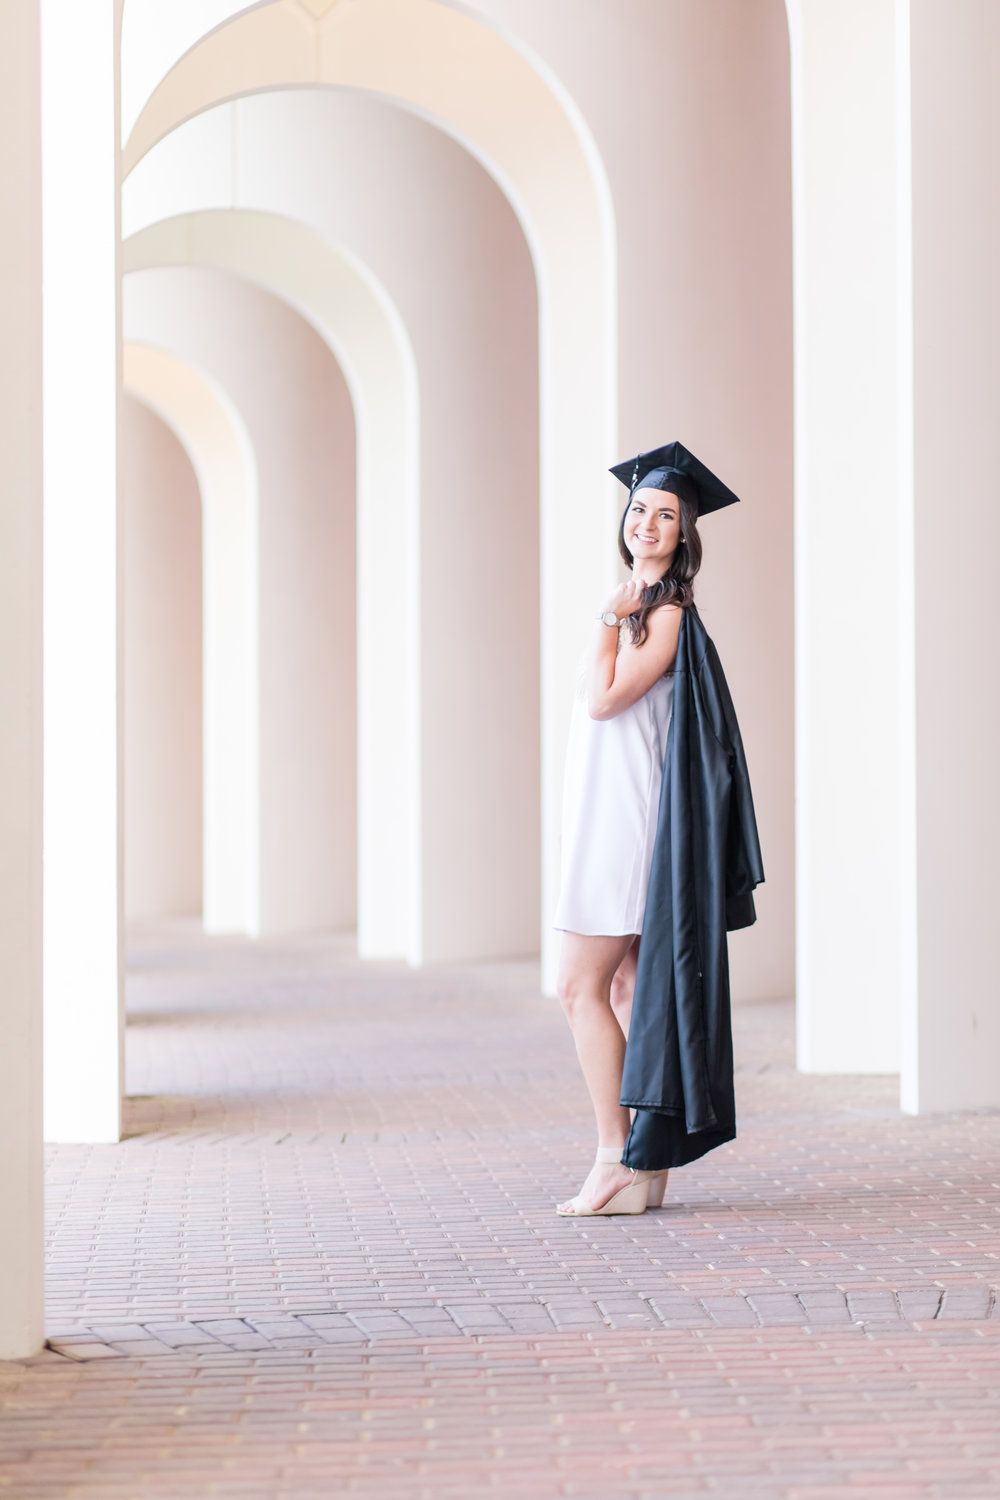 Girl under arches with cap and gown for senior portraits at CNU